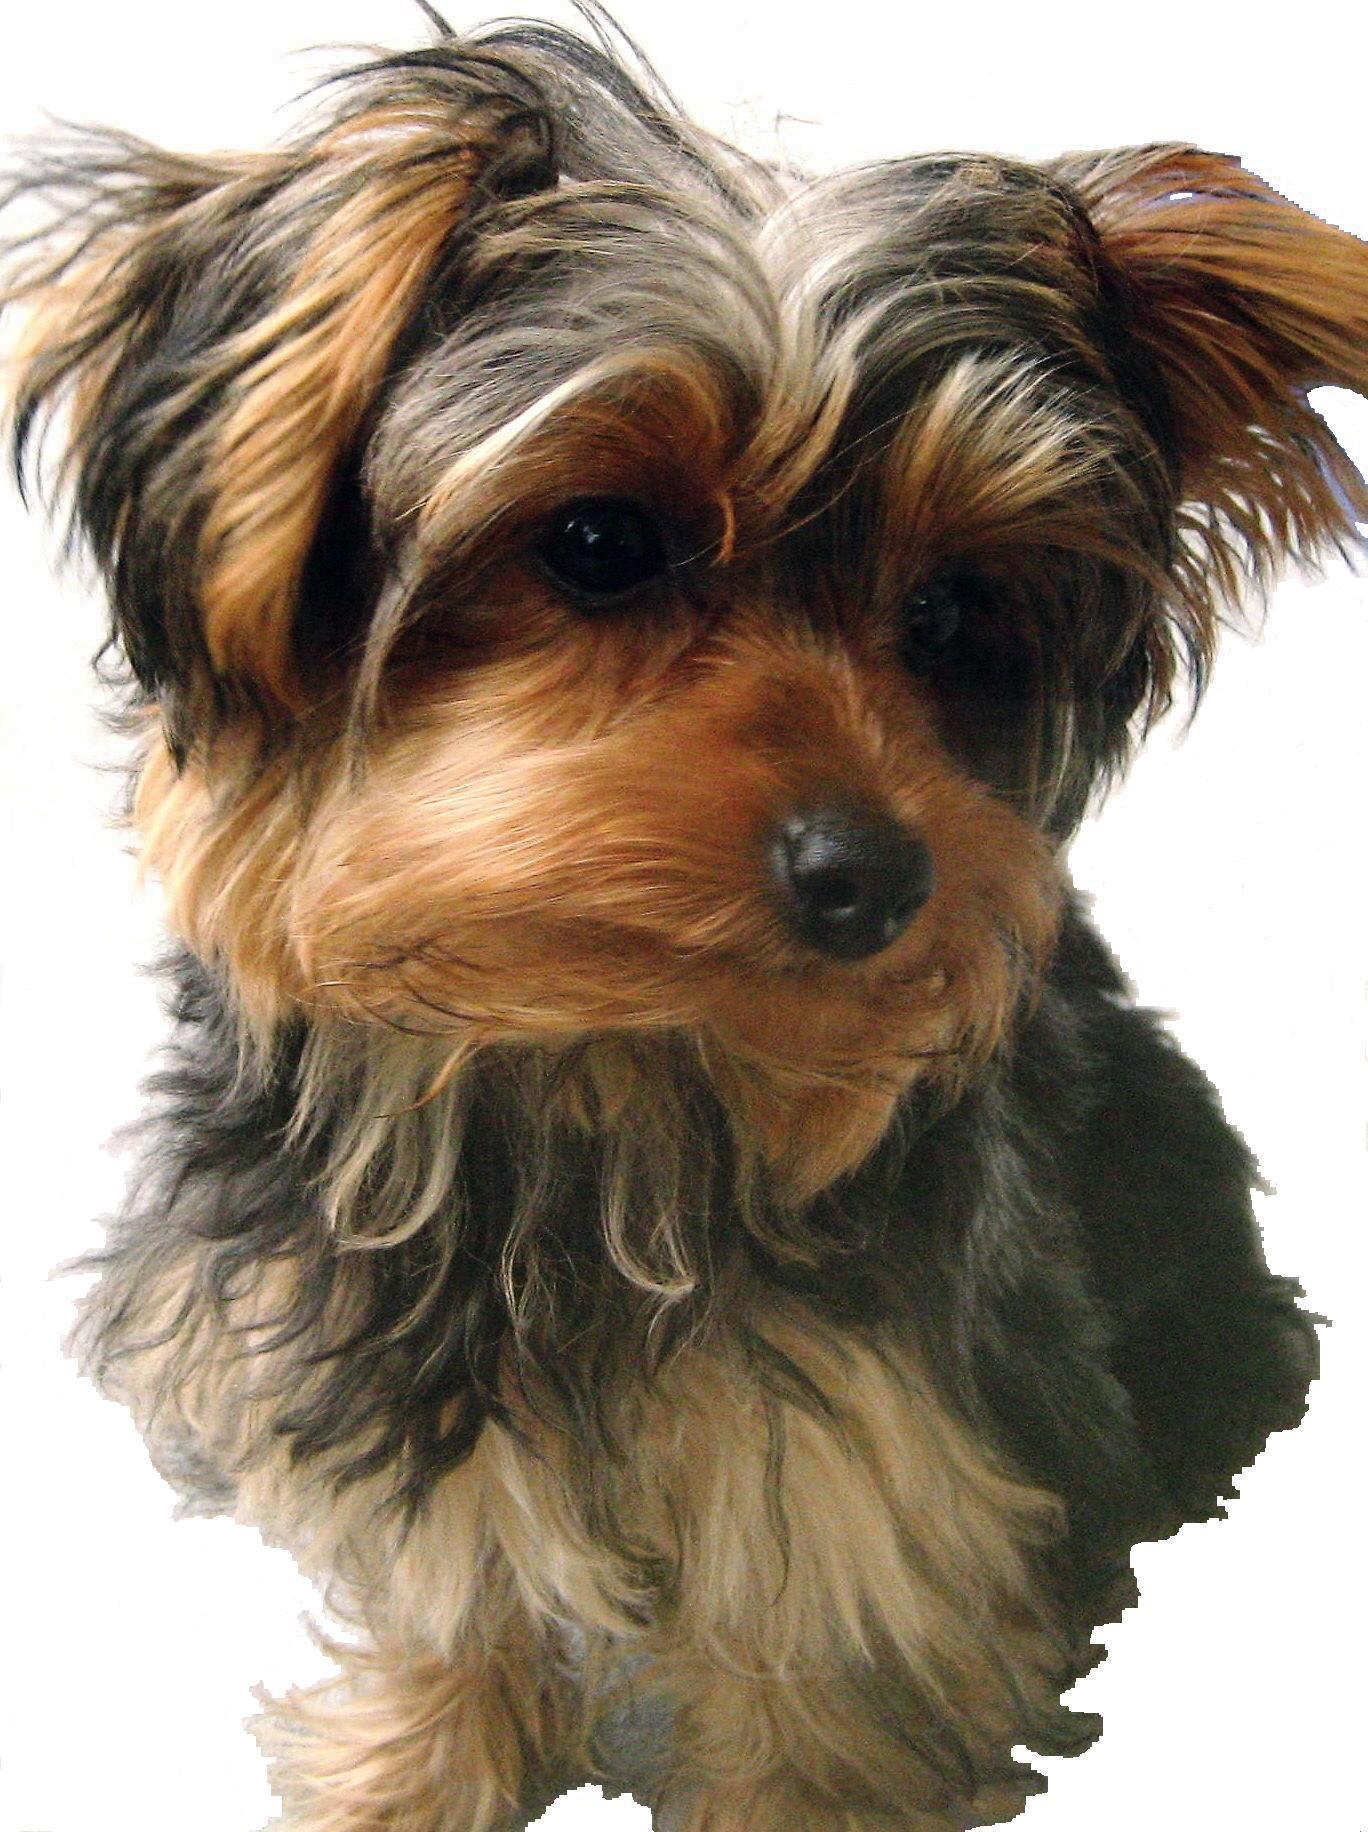 Dog Breed Behaviors Traits The Yorkshire Terrier